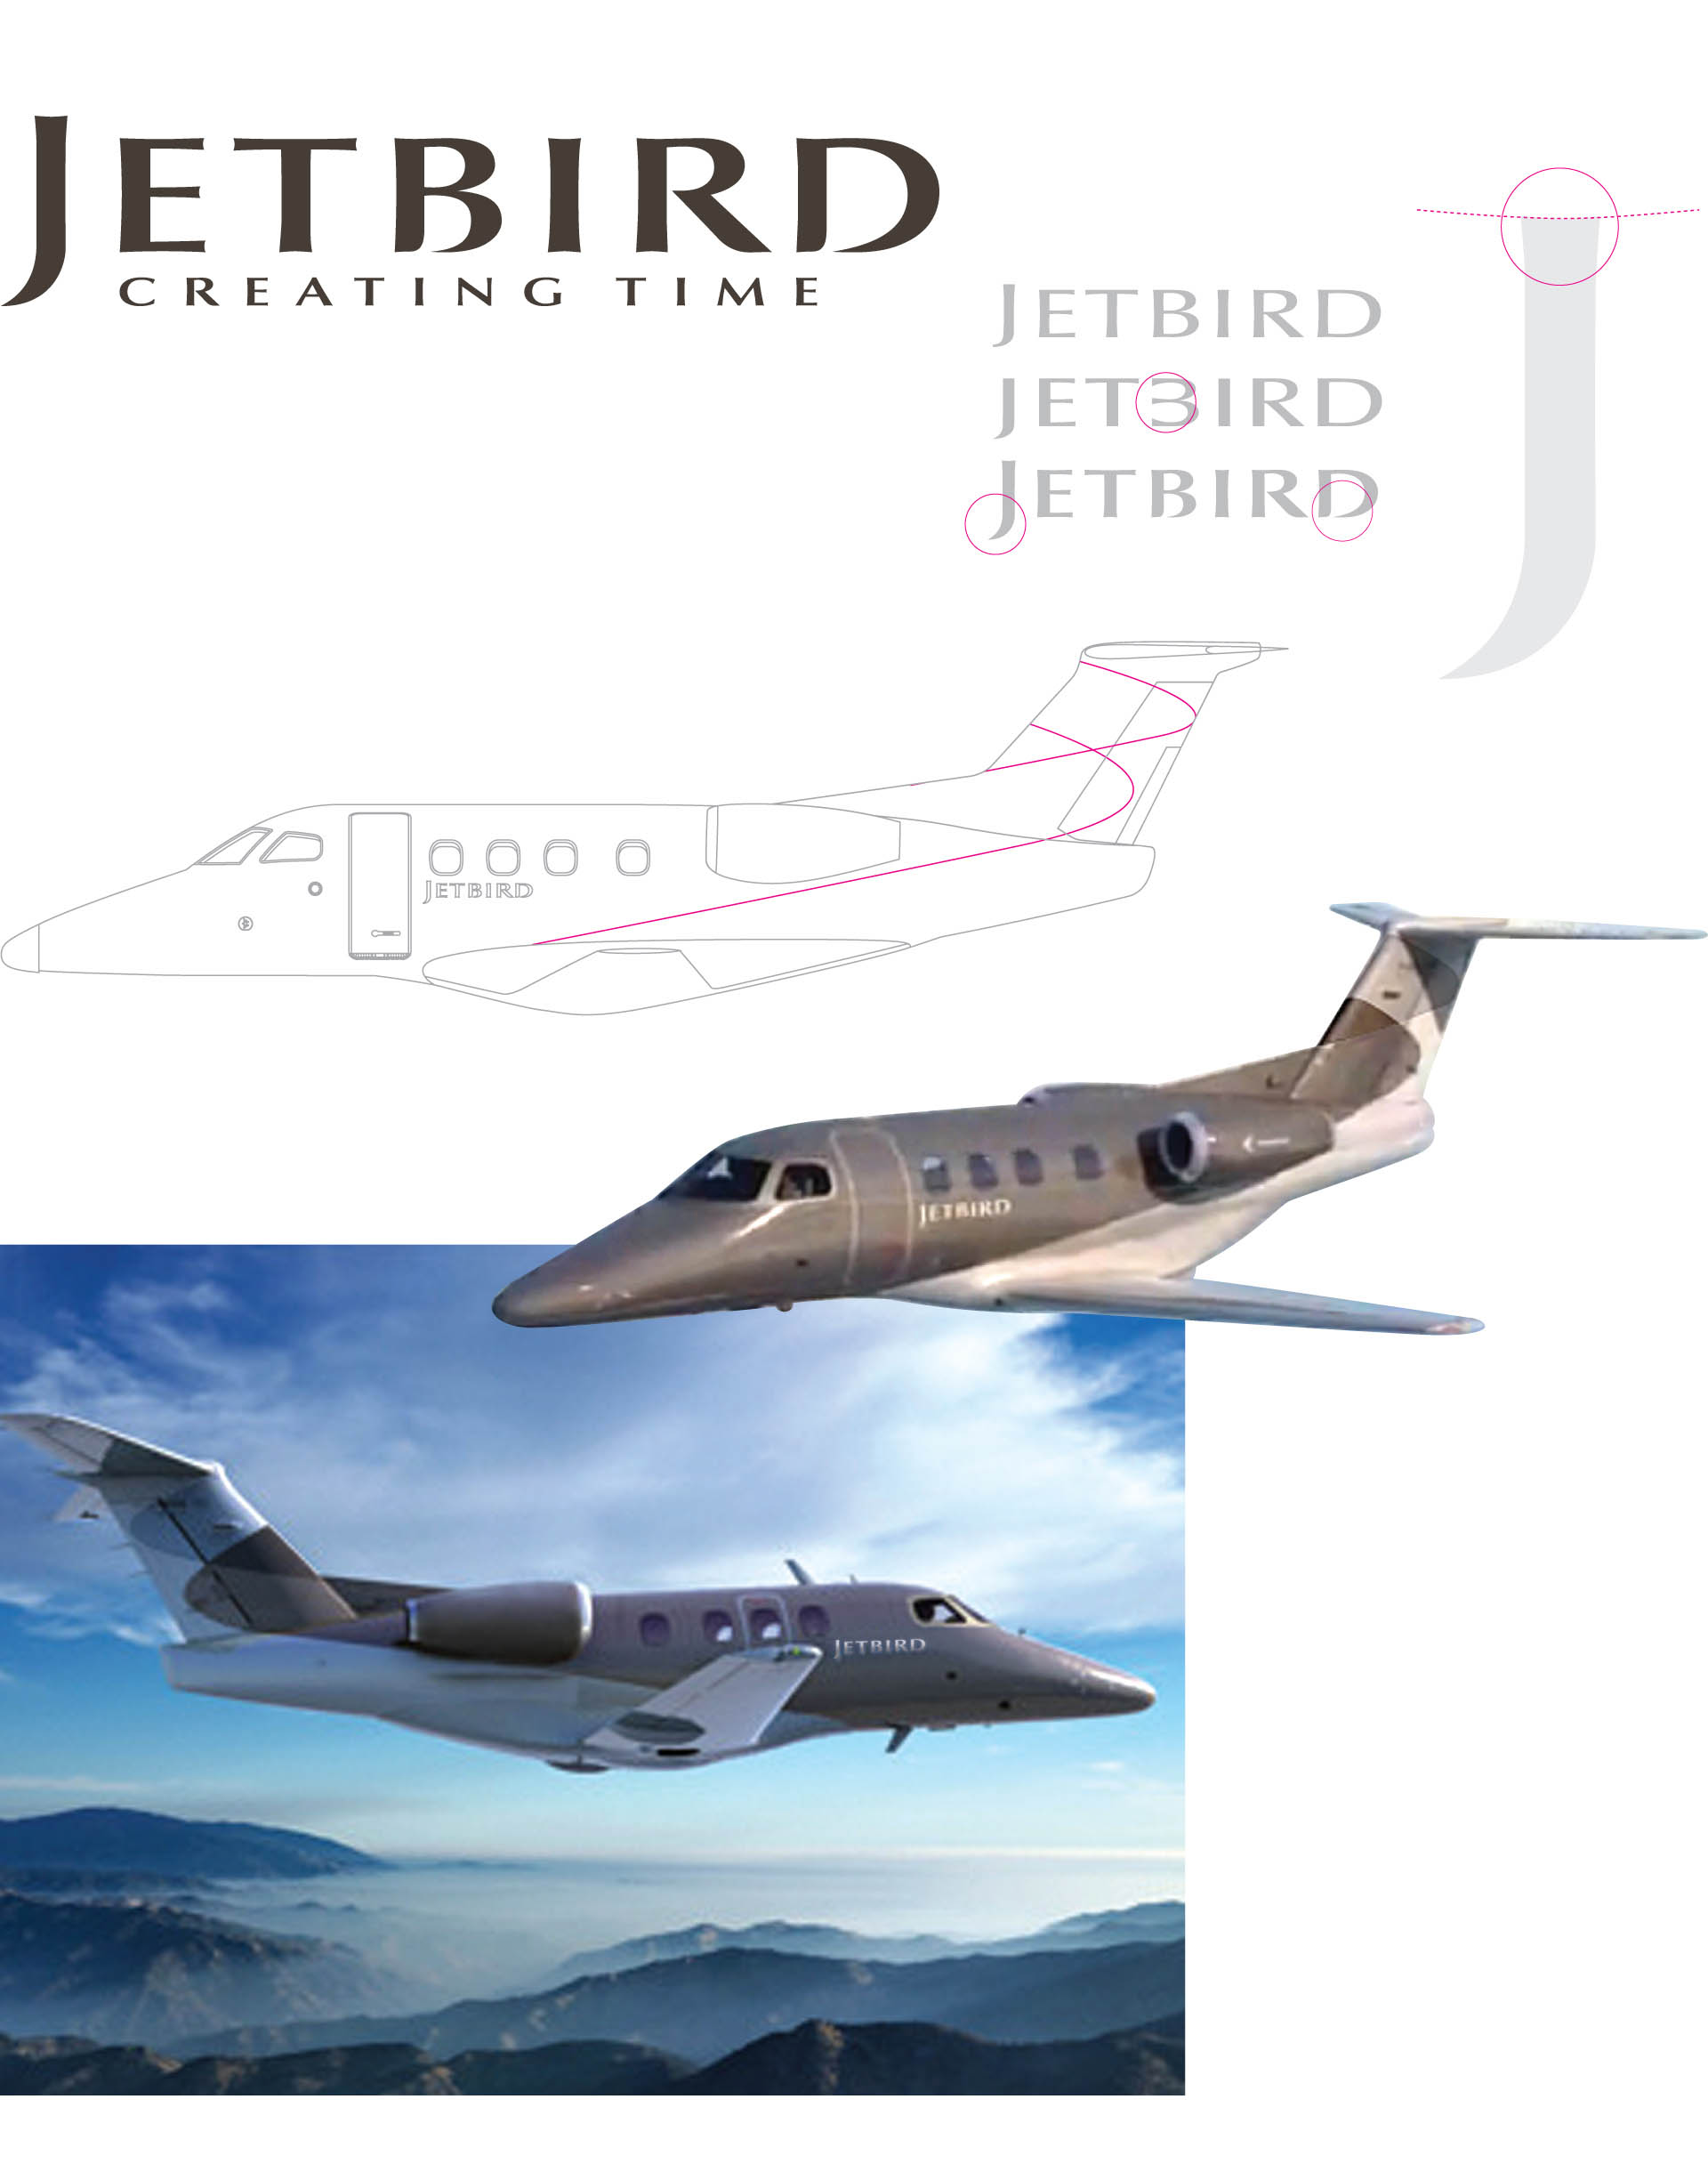 Corporate identity and livery design for Jetbird – offering business travellers private aviation services across Europe